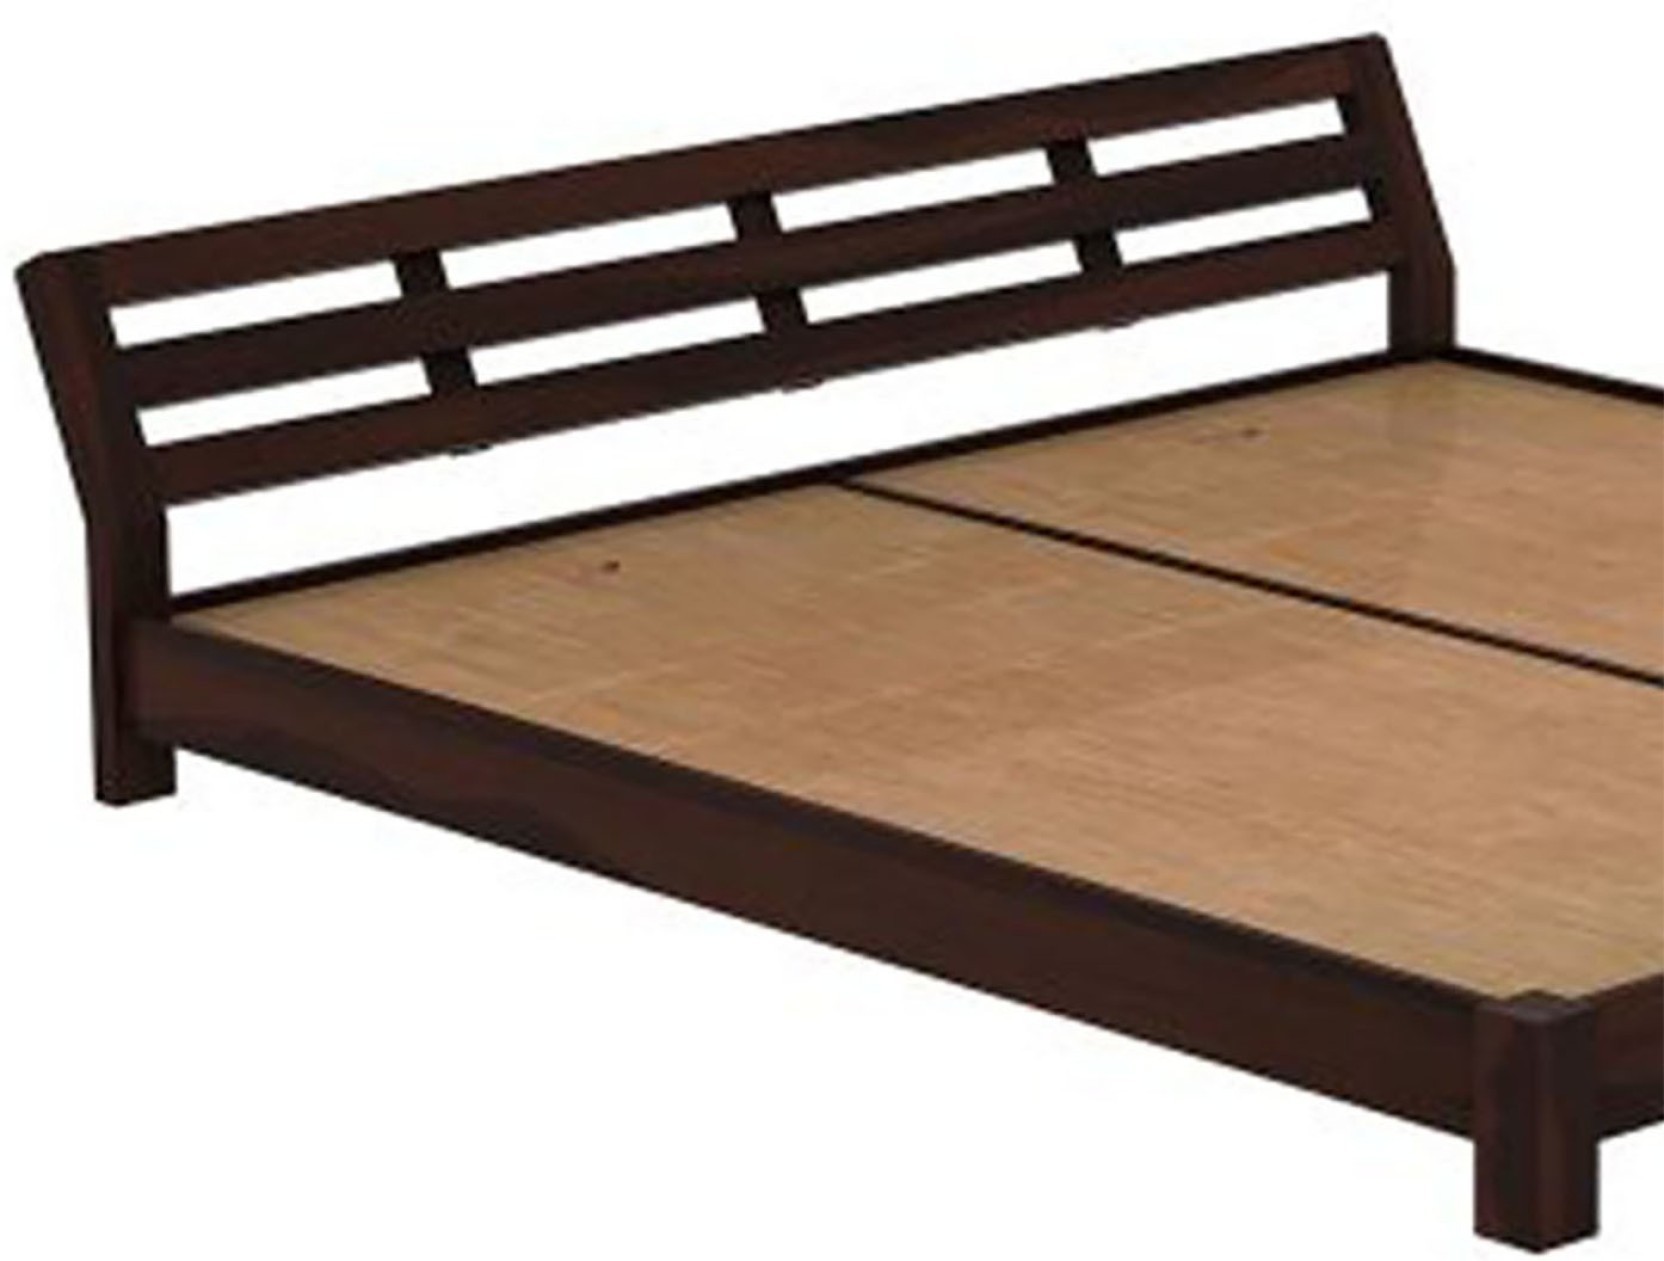 Aaram By Zebrs Sheesham Wood Bed Without Storage Solid Wood King Bed (Finish Color - Walnut, Delivery Condition - DIY(Do-It-Yourself))